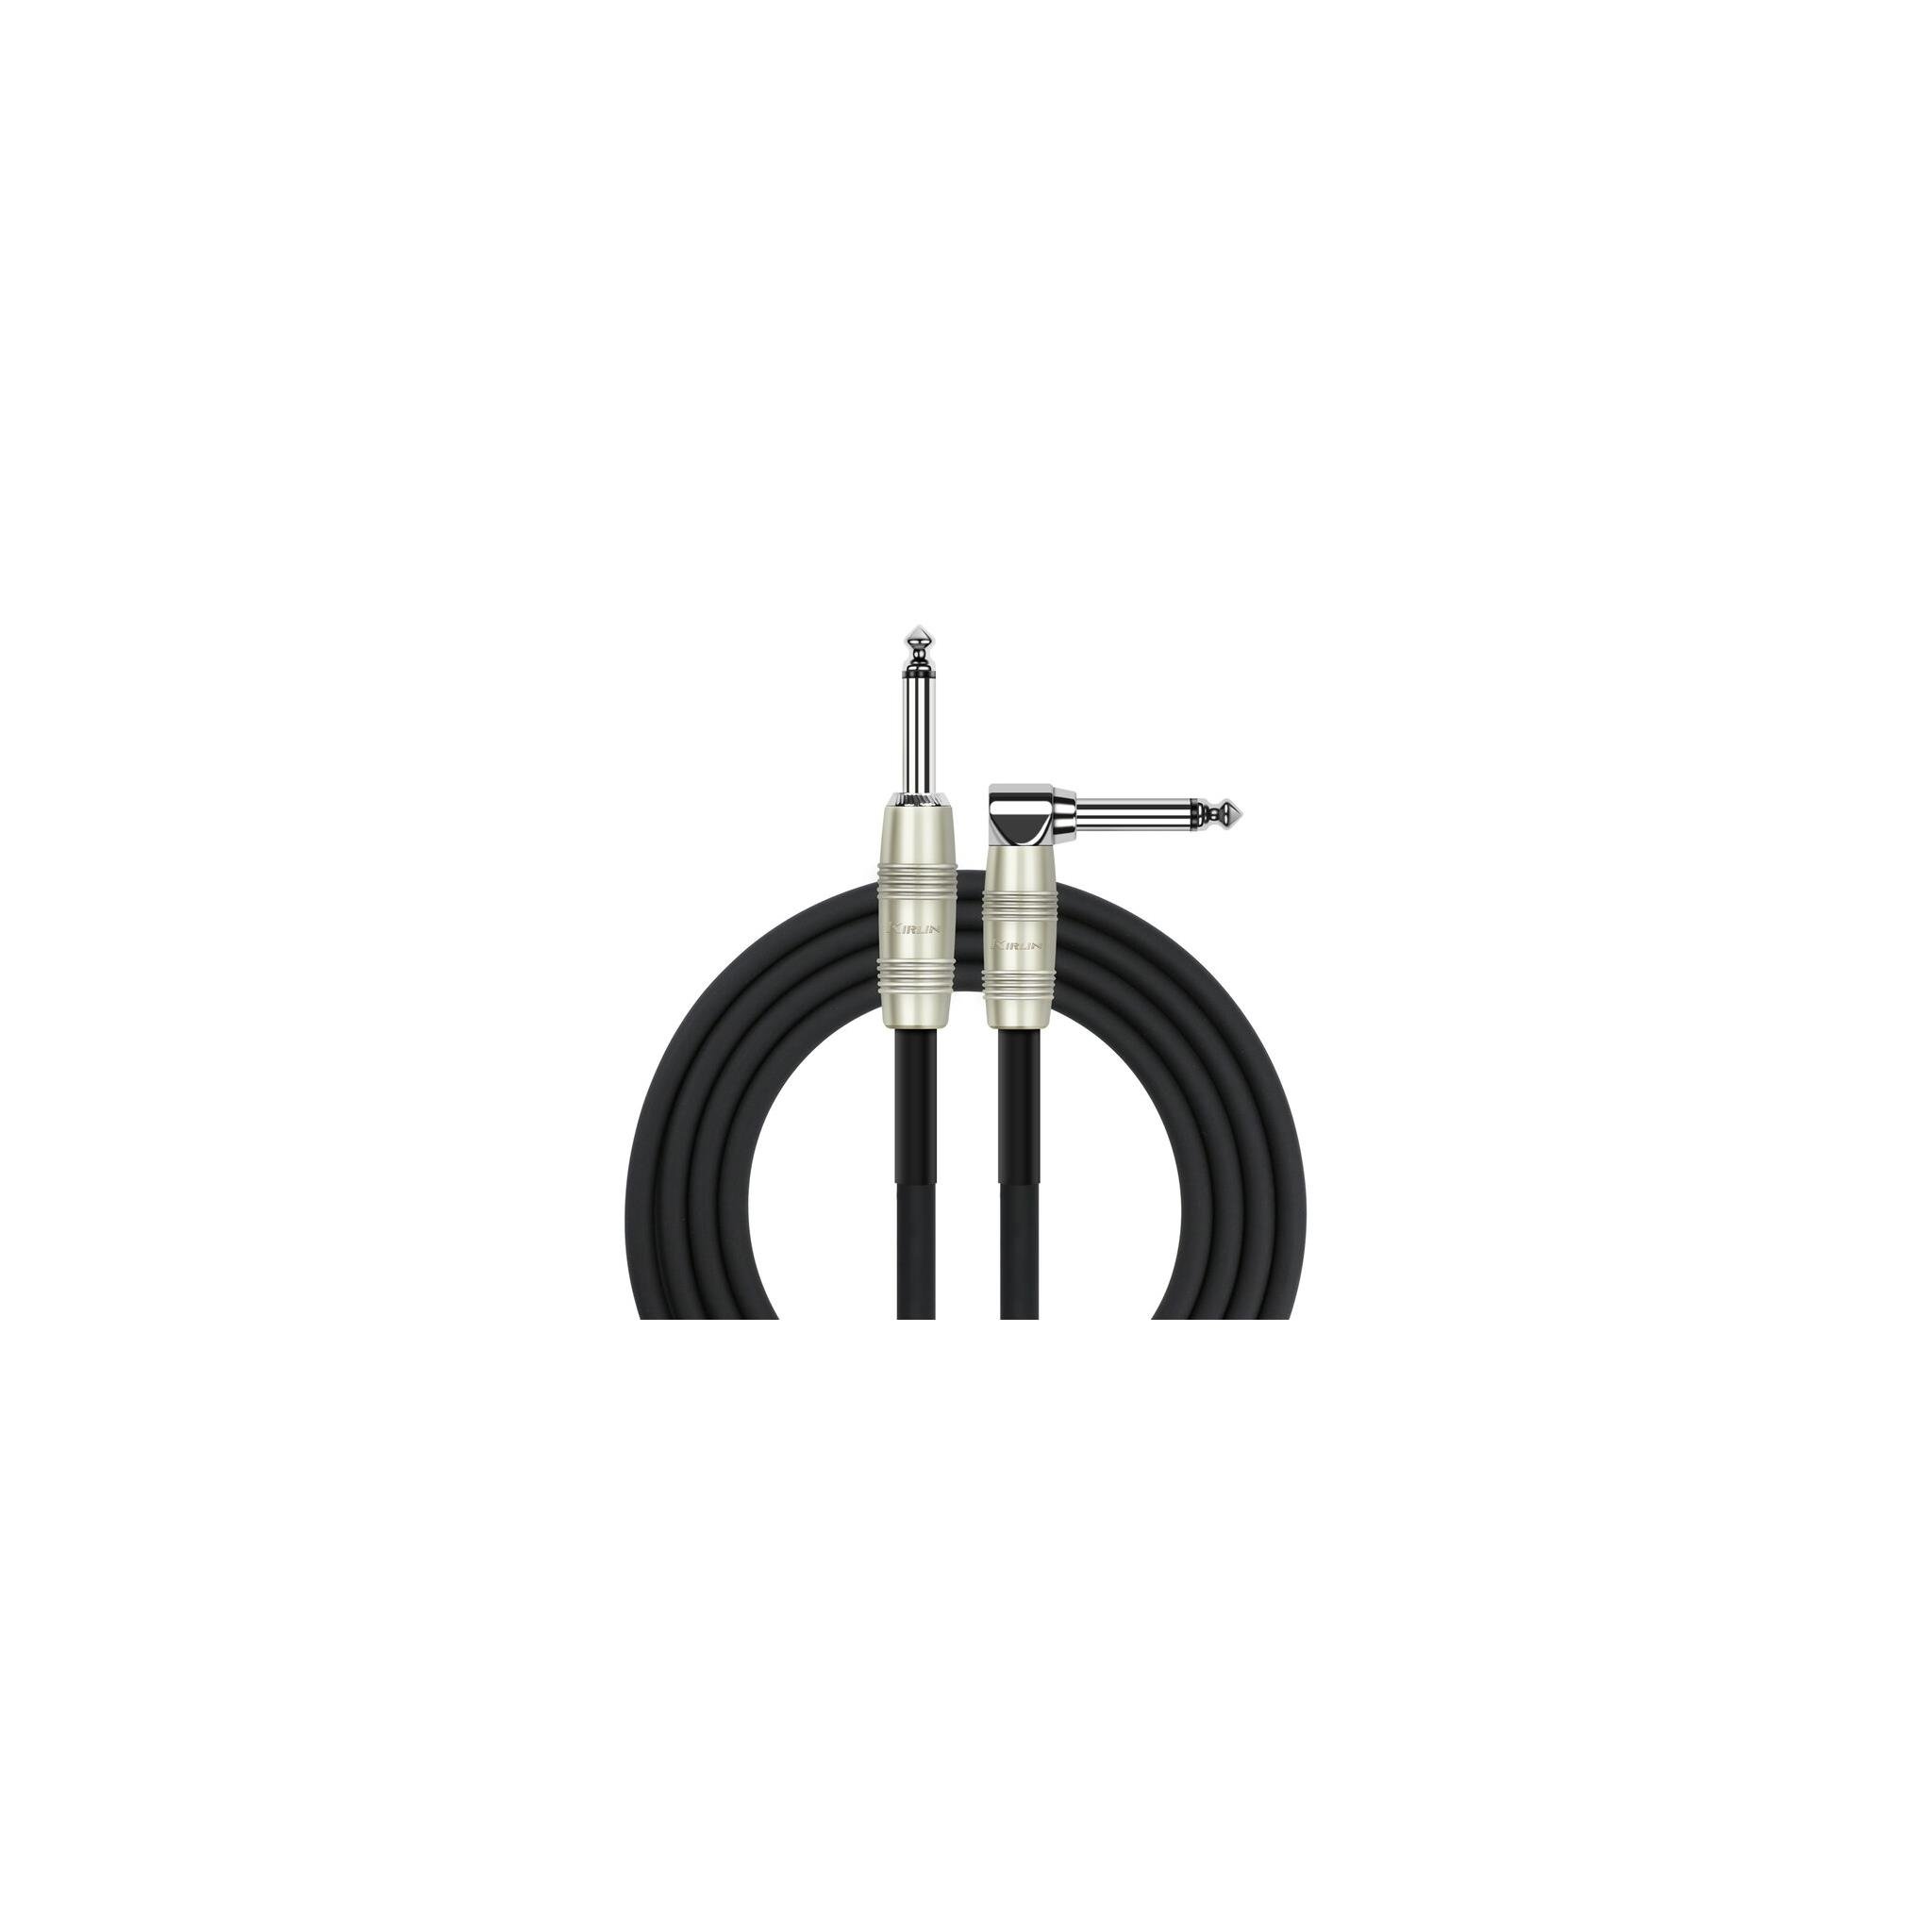 Kirlin 6ft 1/4" Inst Cable RA